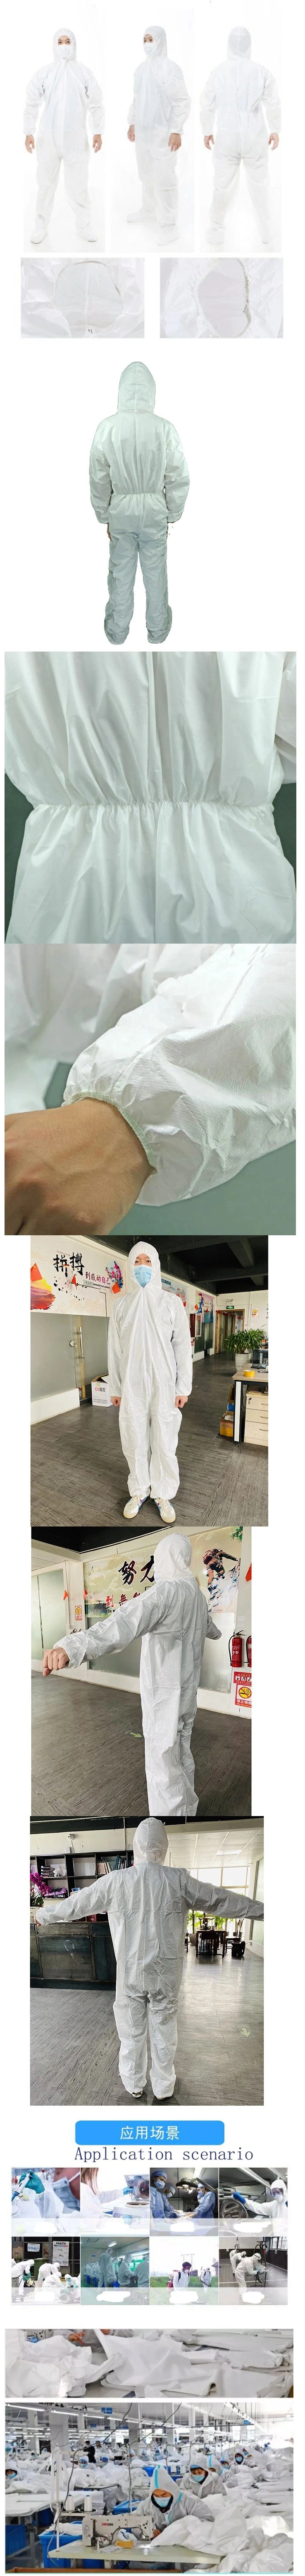 Manufactory Disposable Medical Isolation Gown Protective Gown Medical PPE Coverall Gown Polypropylene PP SMS Nonwoven Waterproof Protective Chemical